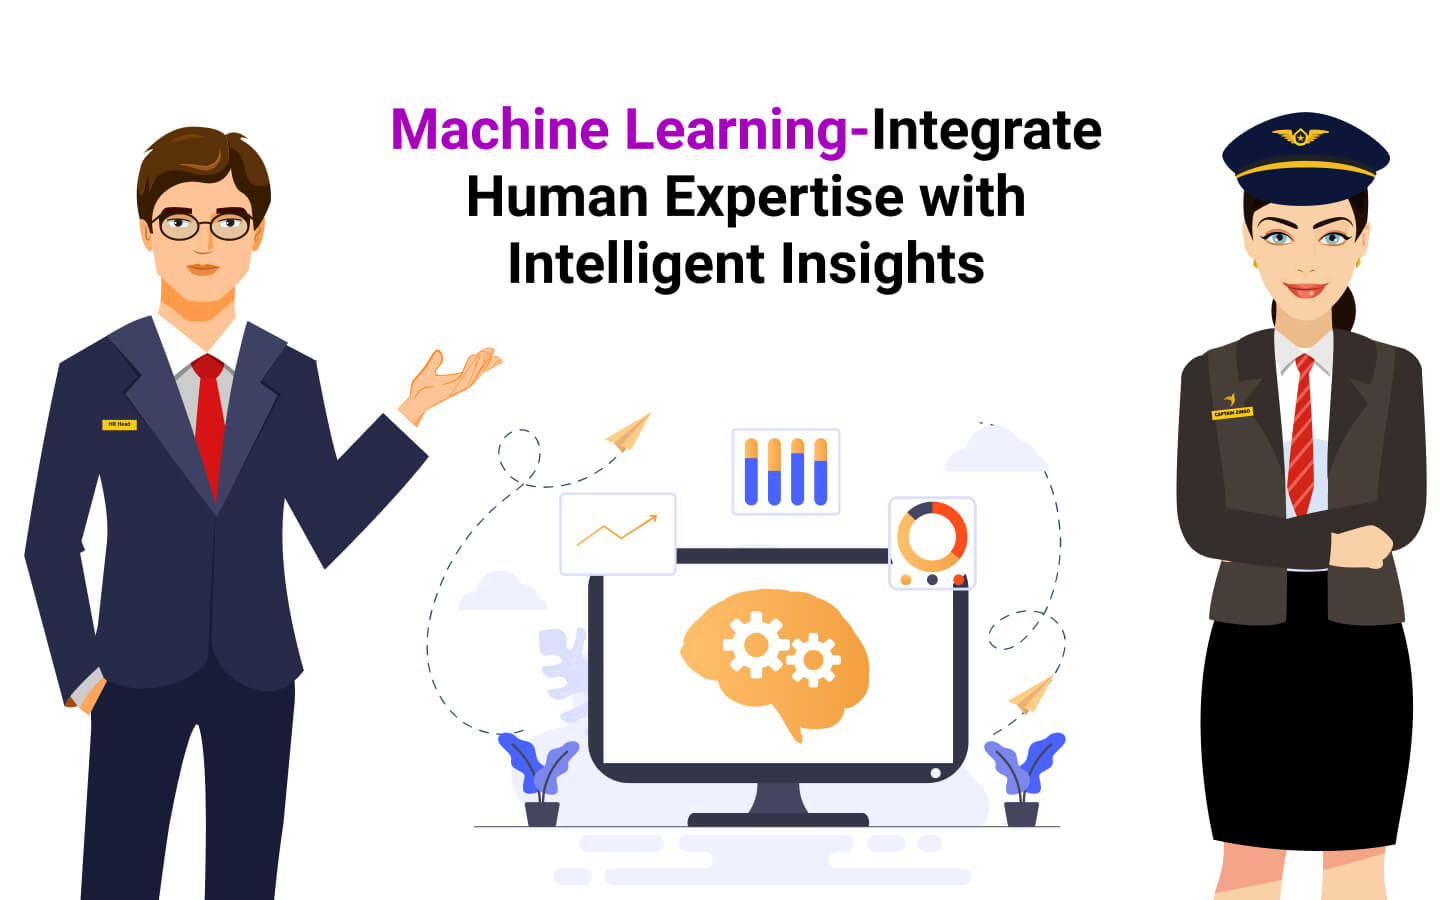 Machine Learning-Integrate Human Expertise with Intelligent Insights.